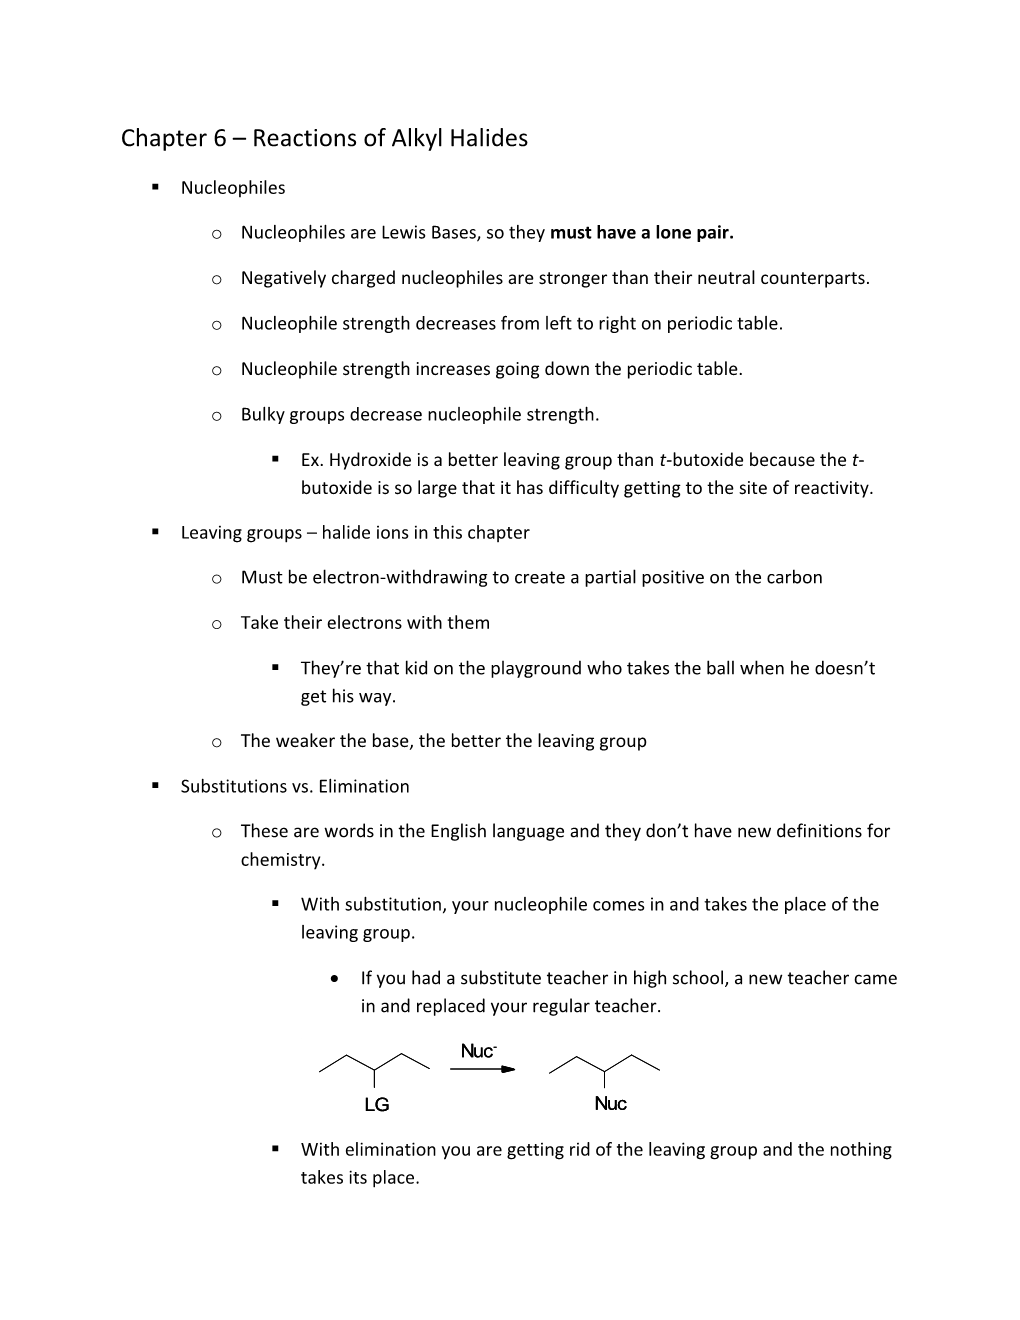 Chapter 6 Reactions of Alkyl Halides